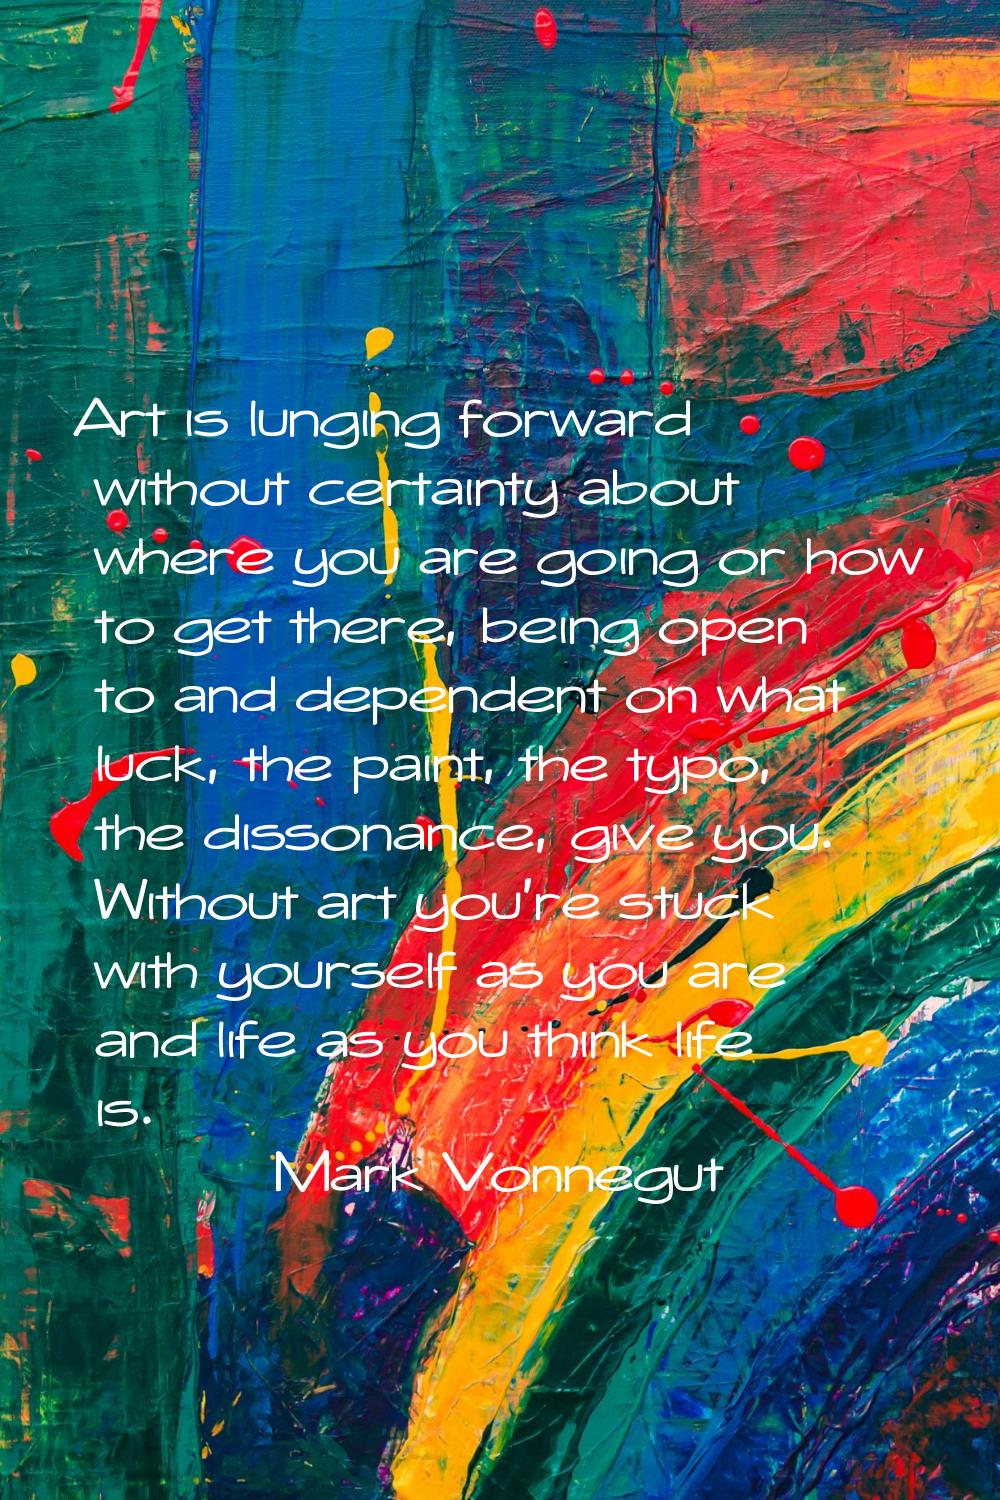 Art is lunging forward without certainty about where you are going or how to get there, being open 